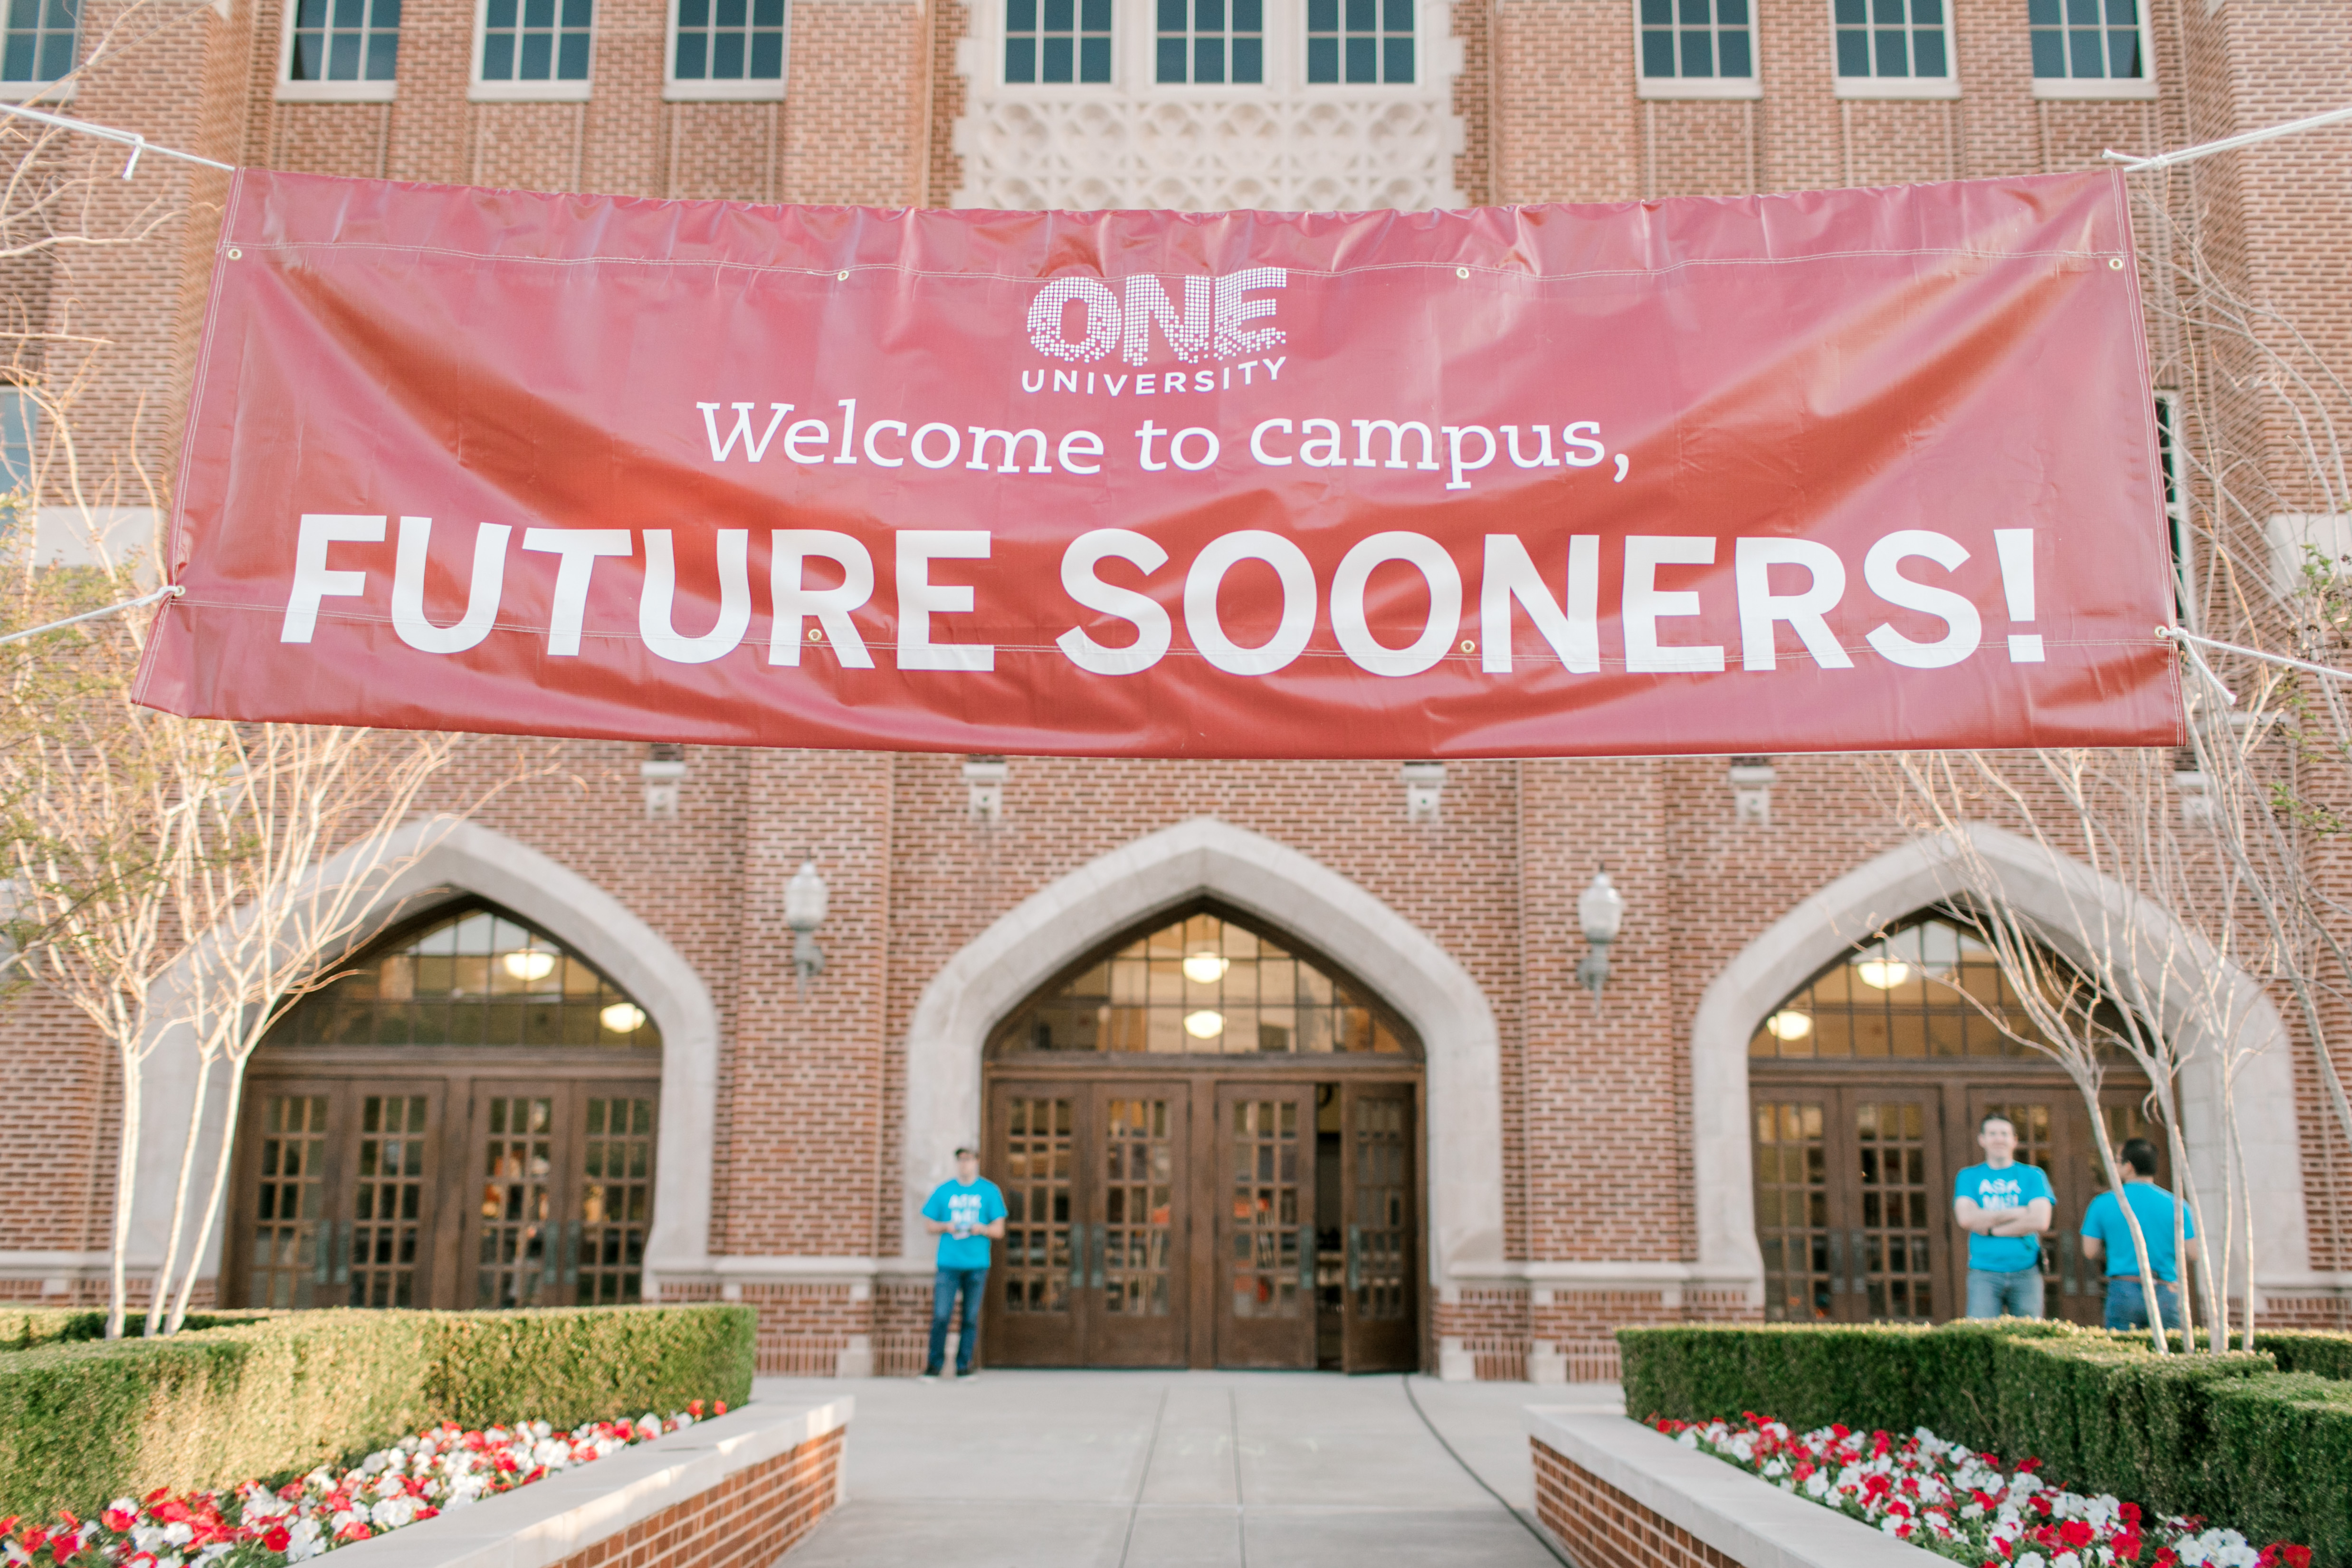 Large "future sooners" banner welcoming new students.